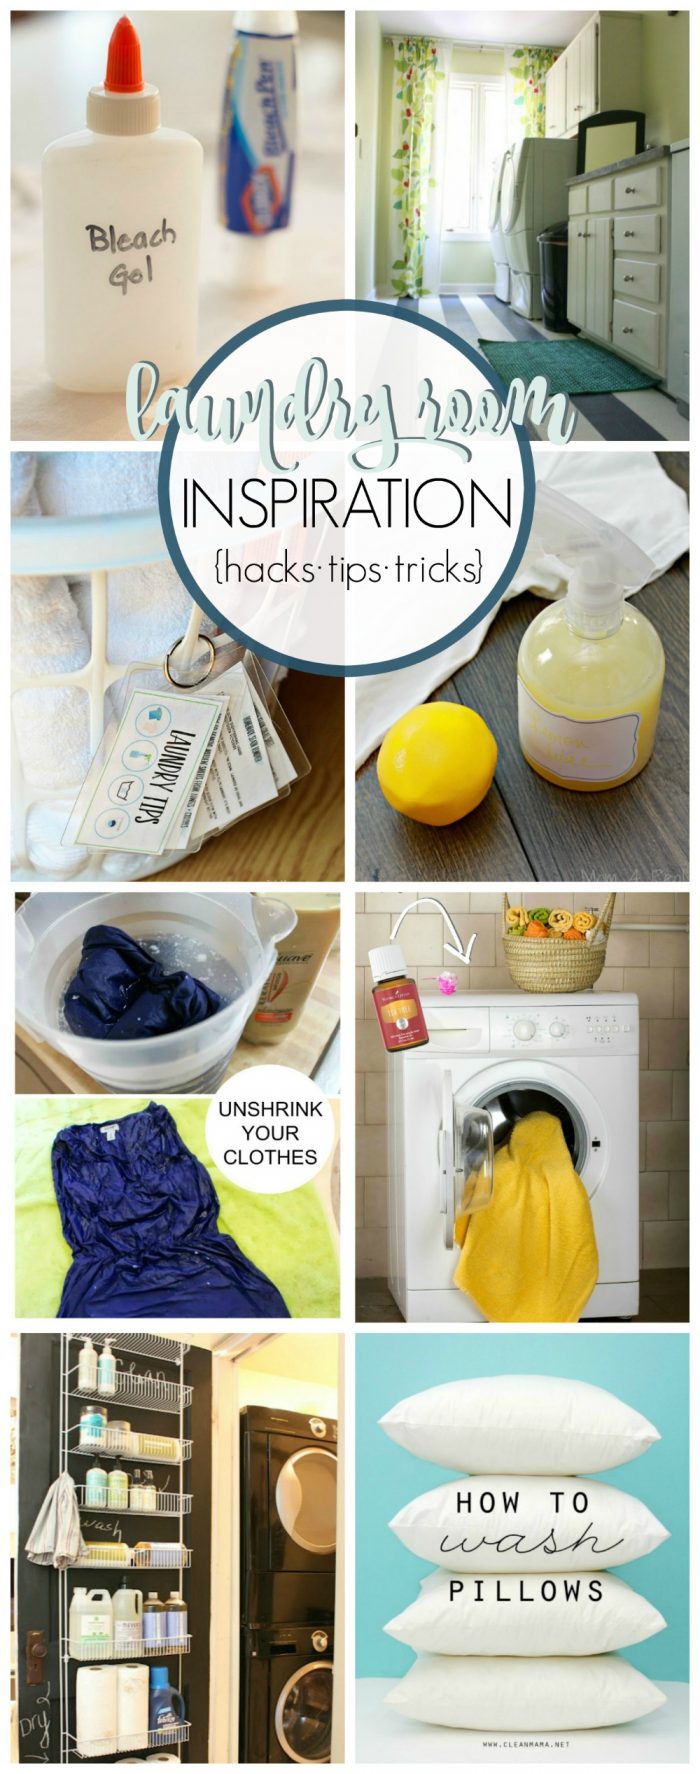 Laundry Room Hacks, Tips, and Inspiration